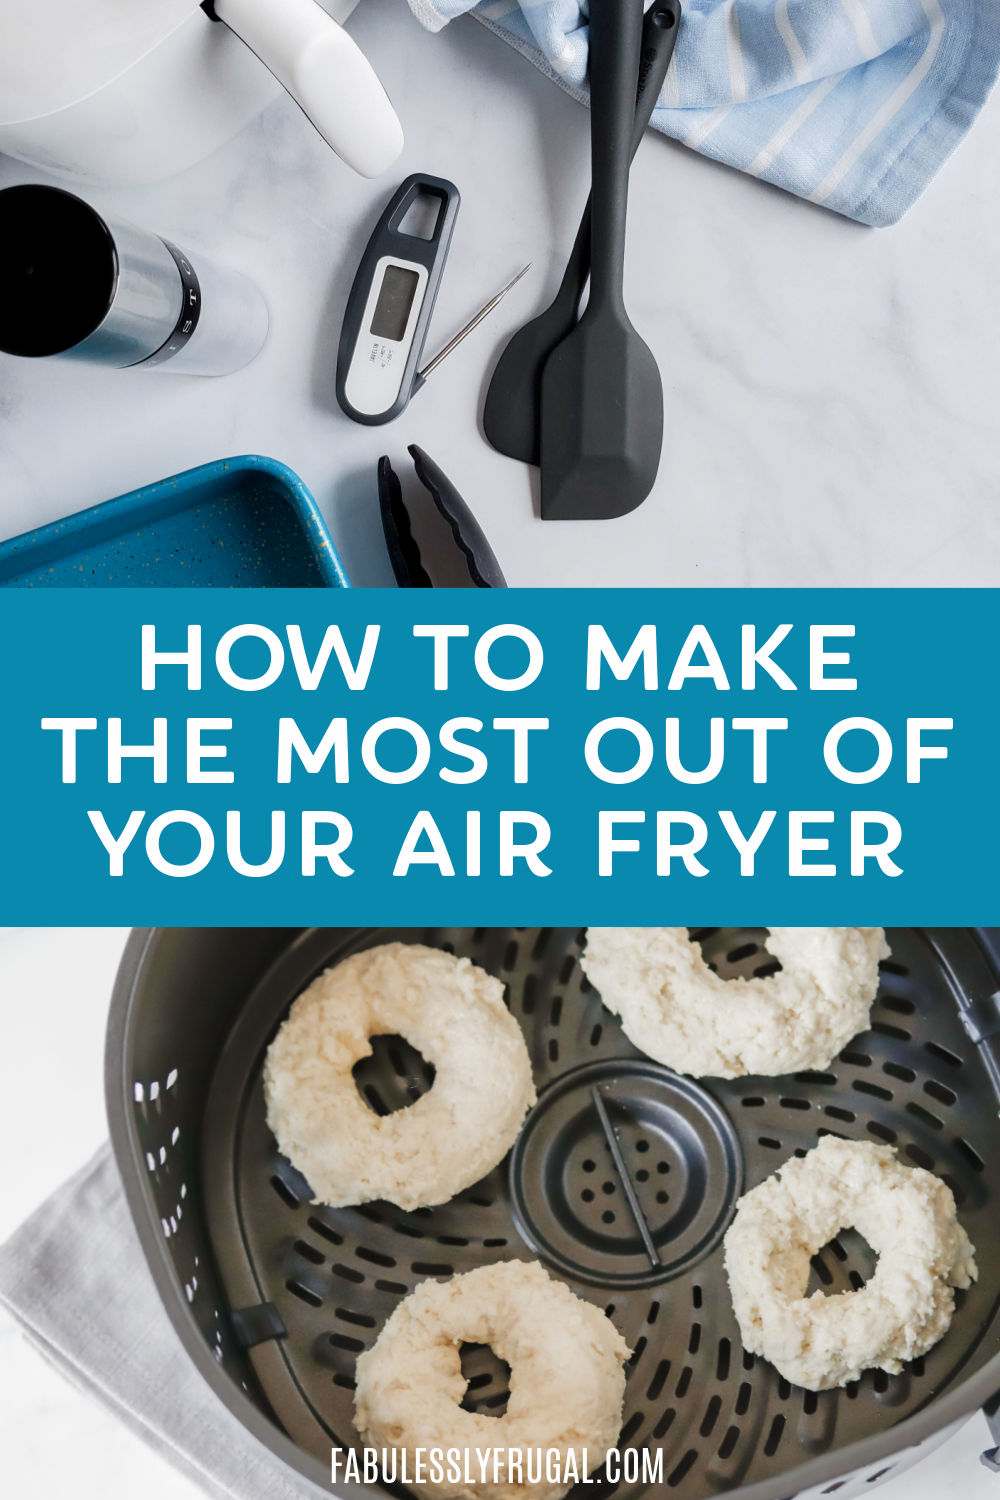 If you use these air fryer tools, you will make the most out of your air fryer and be able to cook the best foods